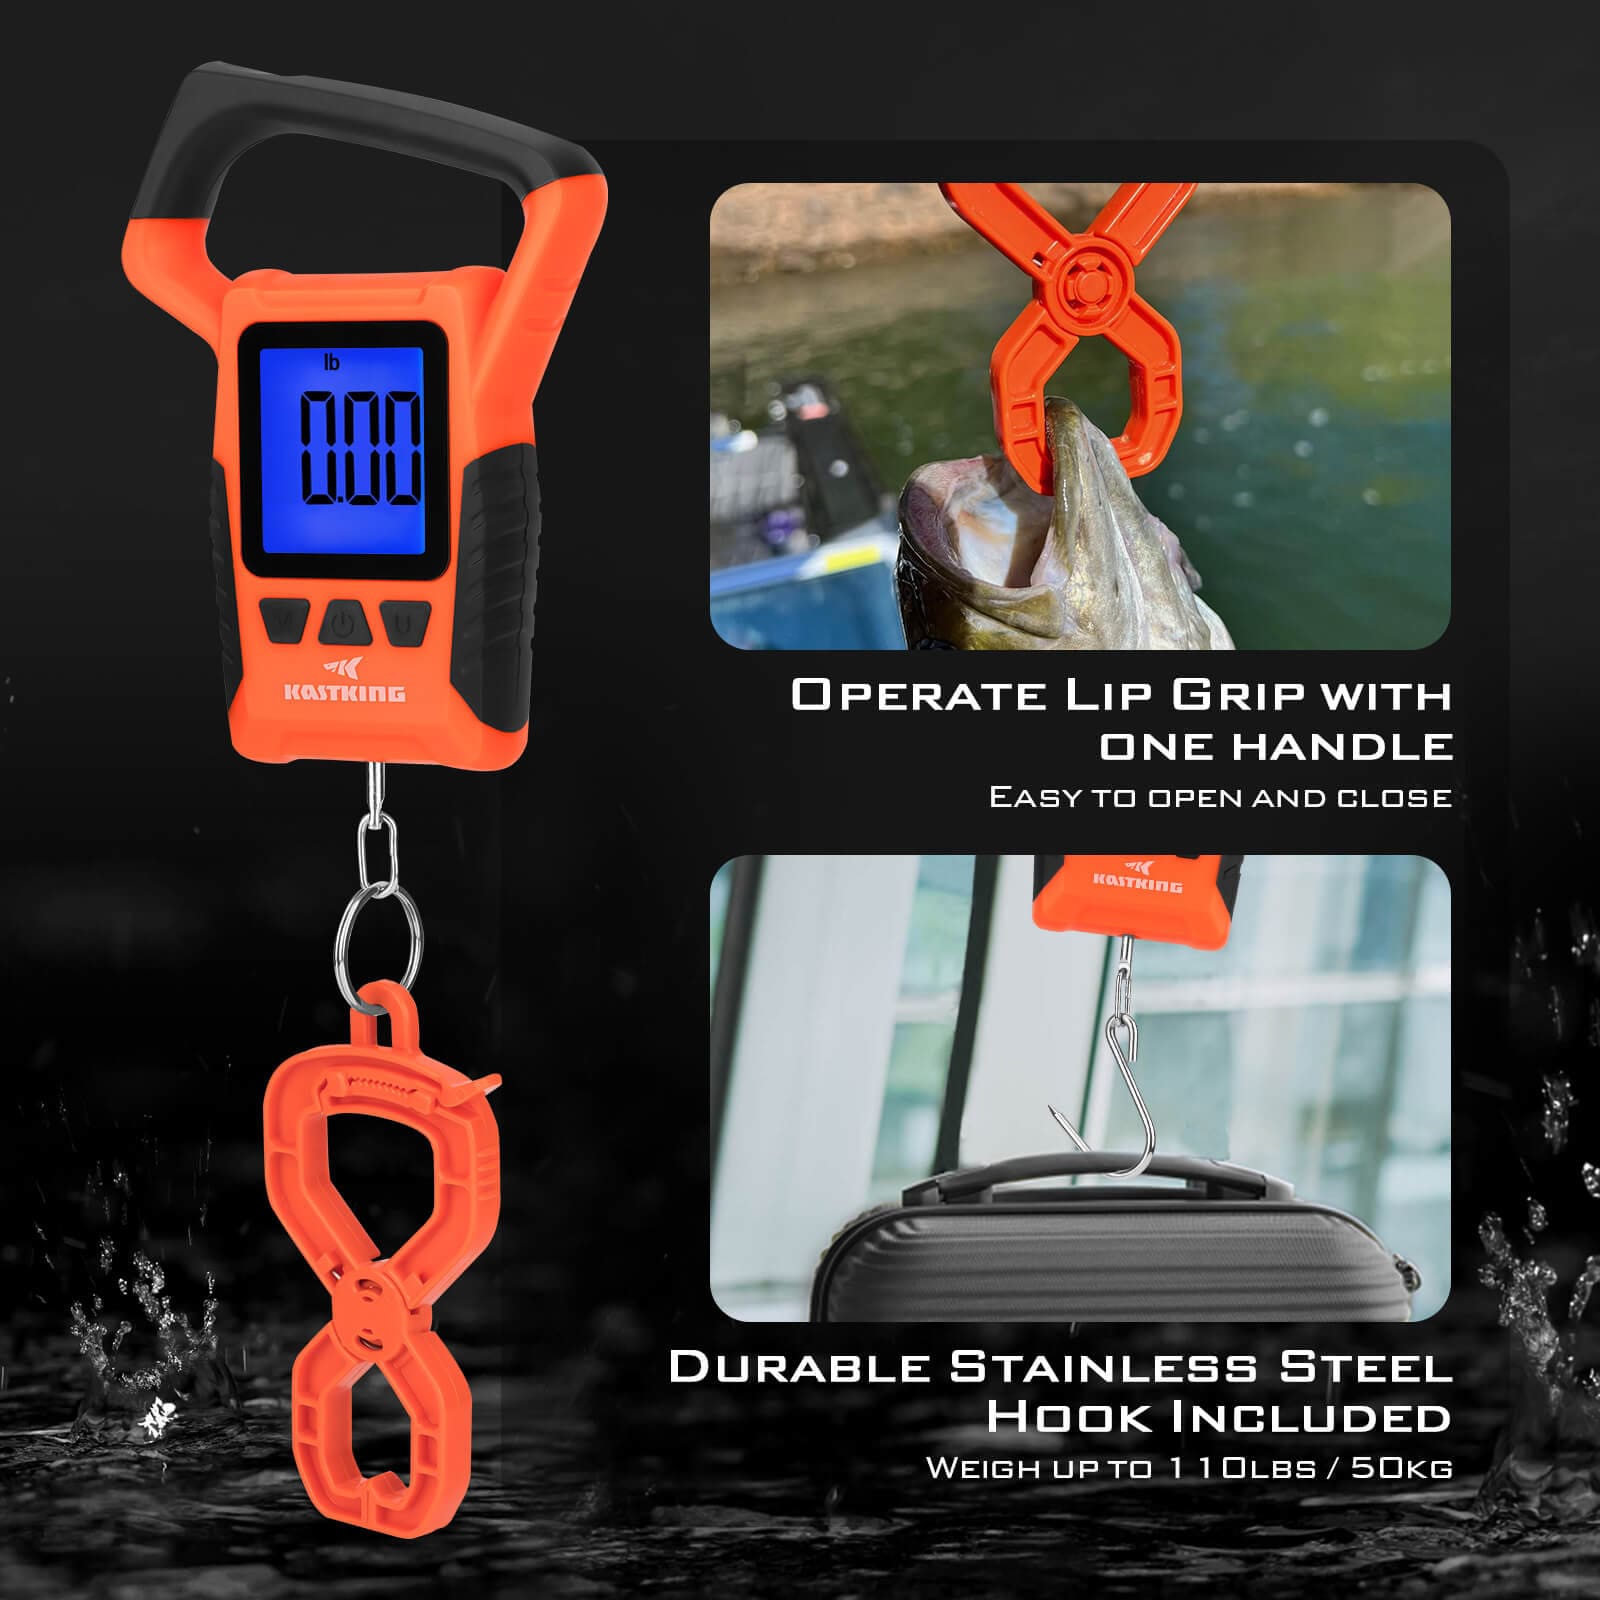 Waterproof Floating Digital Fishing Scale With Non-piercing Lip Clip, Dual  Mode - Lbs/oz And Kg. 0.0-50 Lbs/22.68 Kg, Lightweight Abs Frame, Non-slip